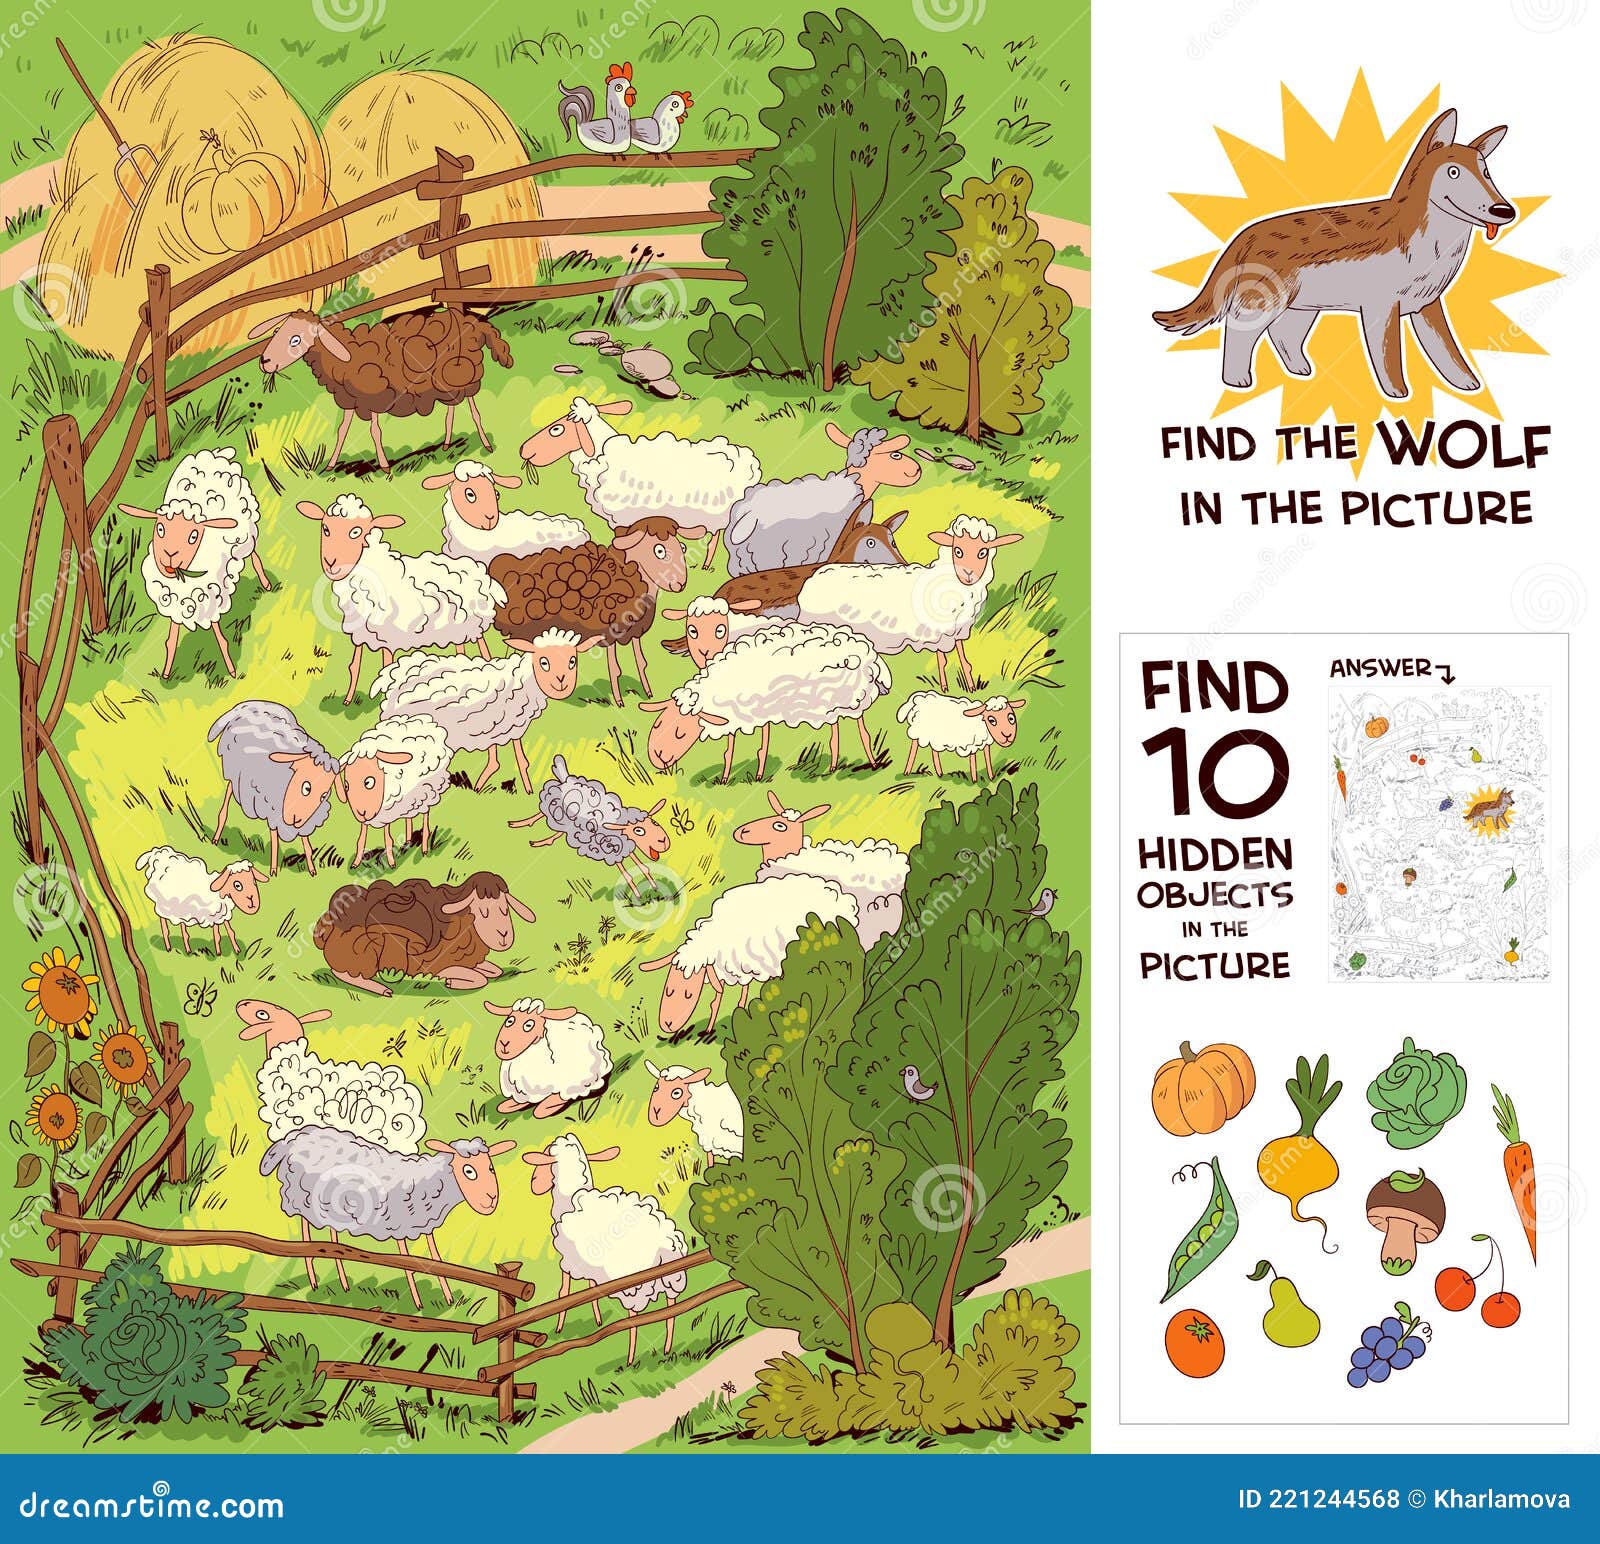 find the wolf among the sheep. find 10 hidden objects